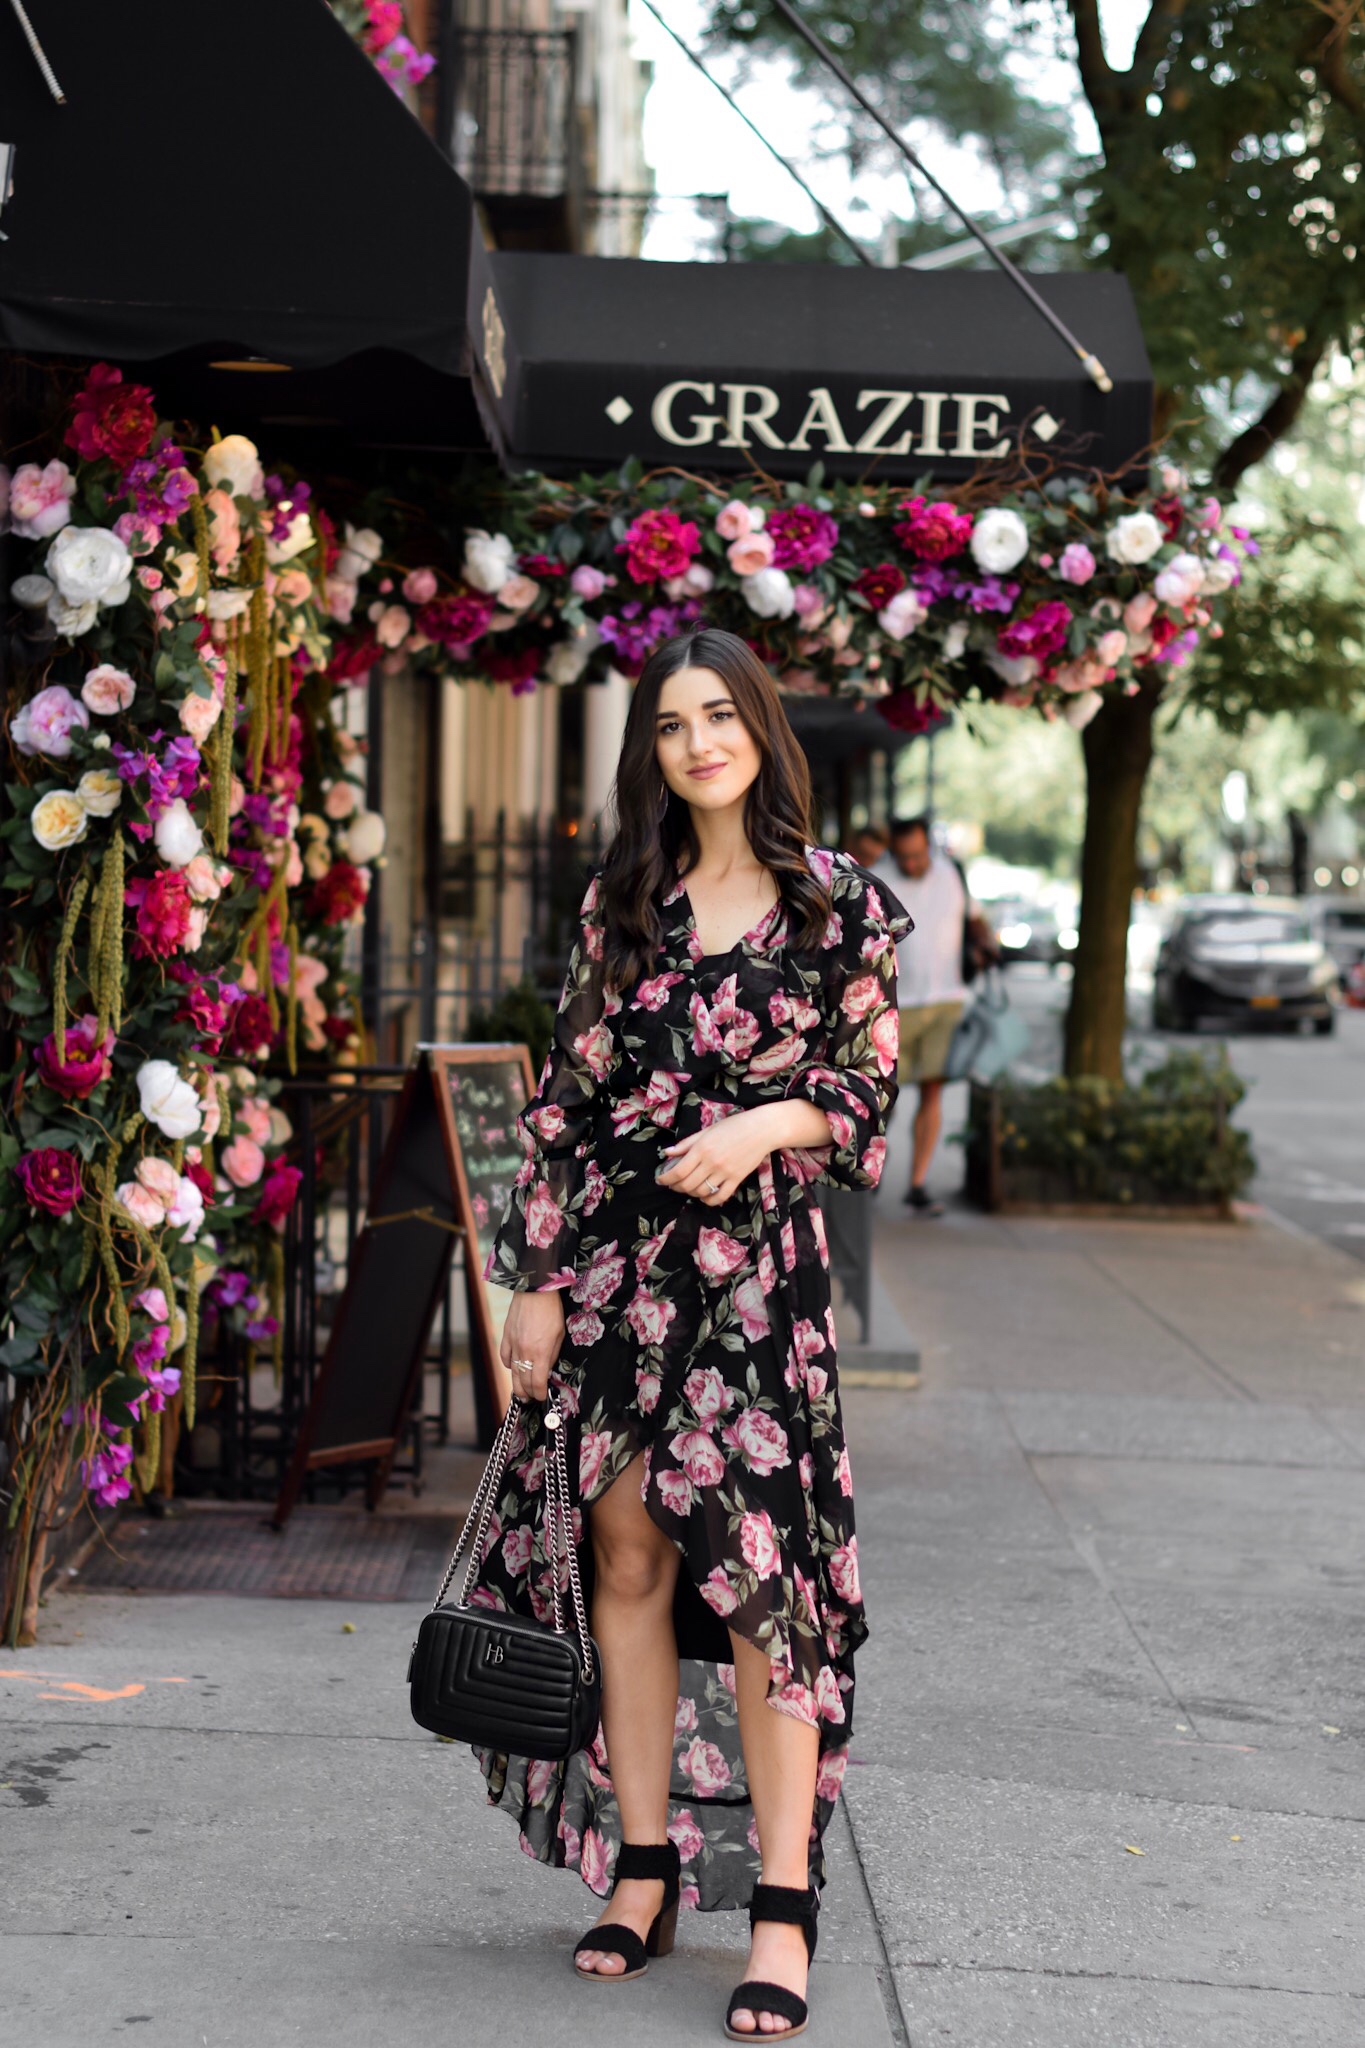 Why I'll Be Sitting Out My 11th Season Of NYFW Floral Maxi Wrap Dress Esther Santer Fashion Blog NYC Street Style Blogger Outfit OOTD Trendy ASOS Vince Camuto Black Braided Sandals Summer Look Floral Backdrop New York City Upper East  Side Photoshoot.jpg